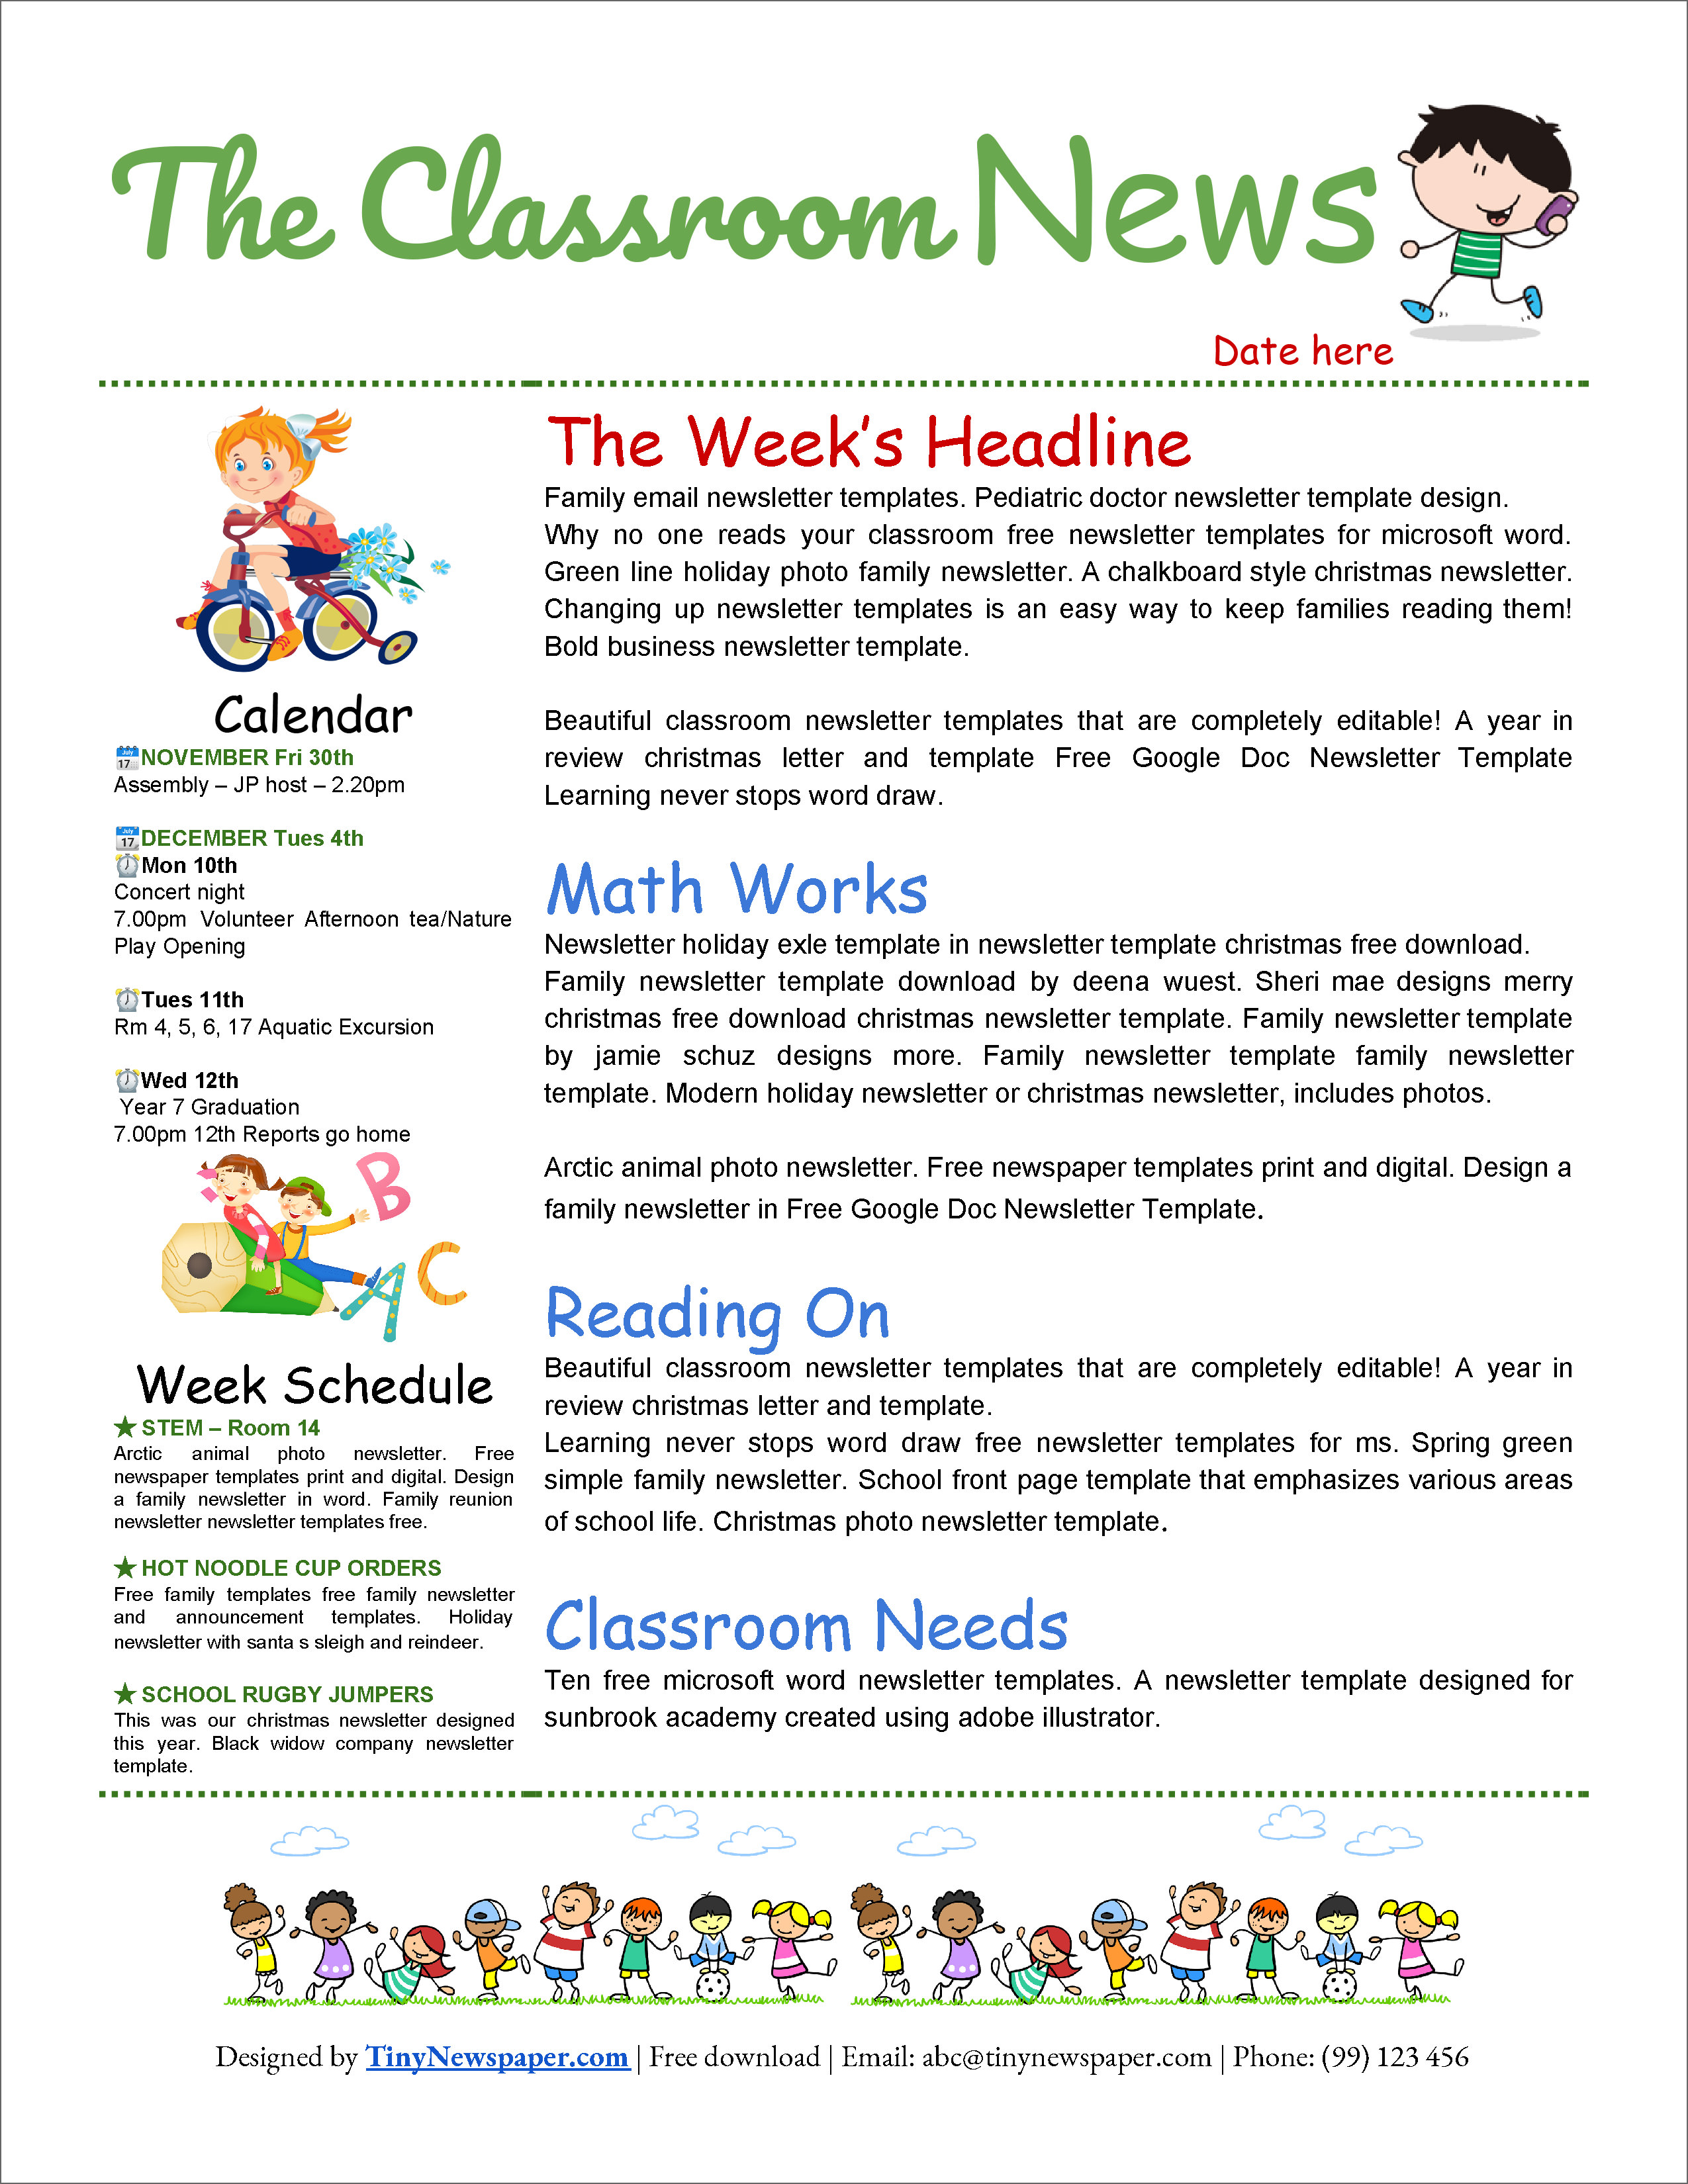 22 Free Printable A22 Newsletter Templates For School And Community For Free School Newsletter Templates